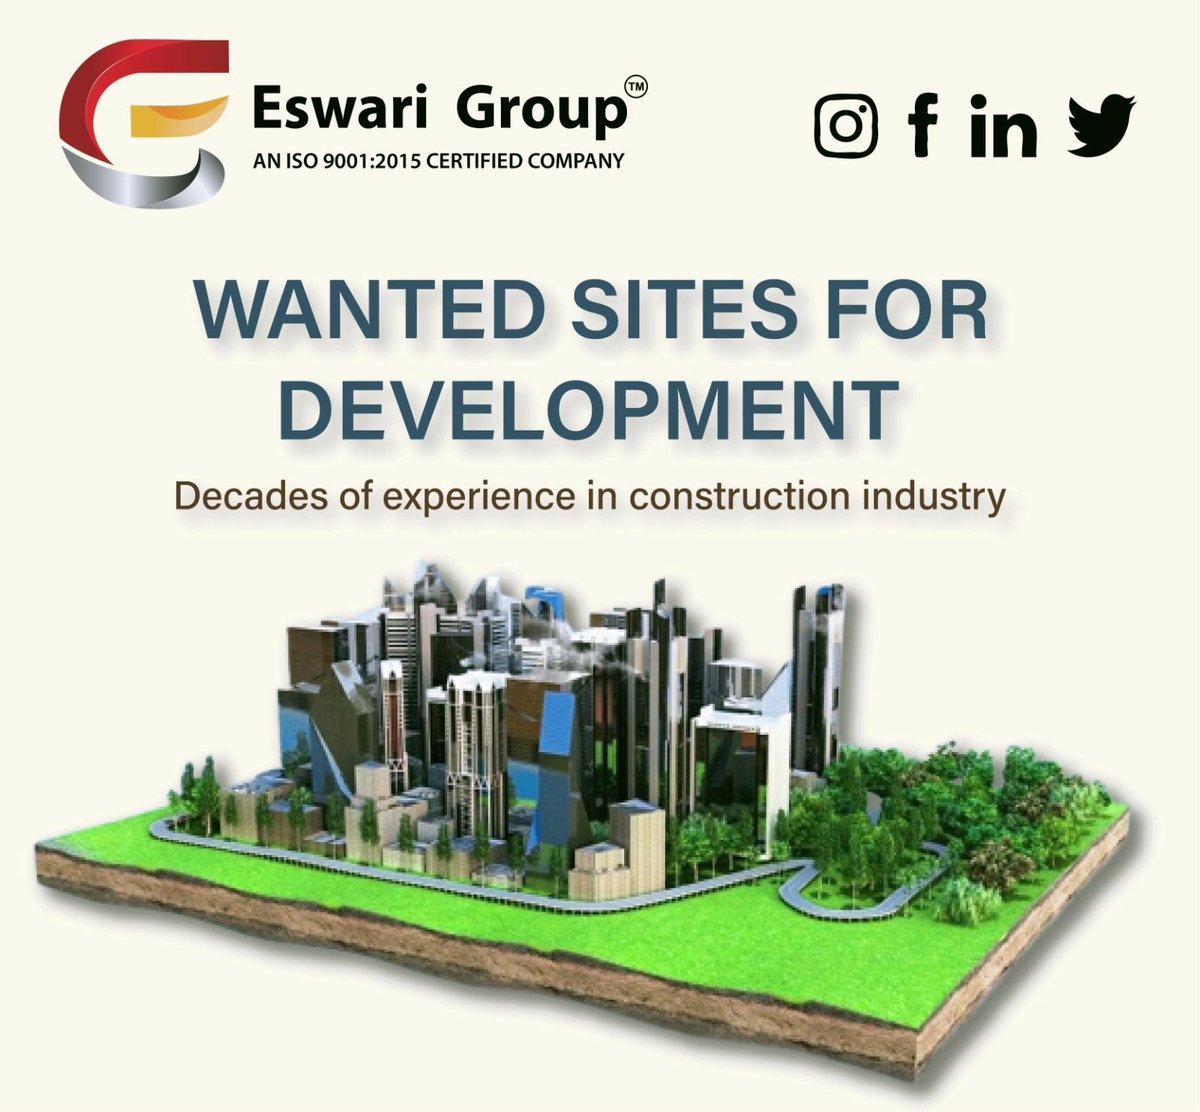 If you don't want your landlord to knock your door #everymonth .get a home of your own with #EswariGroup .
#eswariflats
#eswariinteriors 
#EswariHomes 
#teacher 
#visakhapatnamrealestate 
#lovewhereyoulive 
#govtjobs 
#doctors
For more information contact haritha phn:7036952137